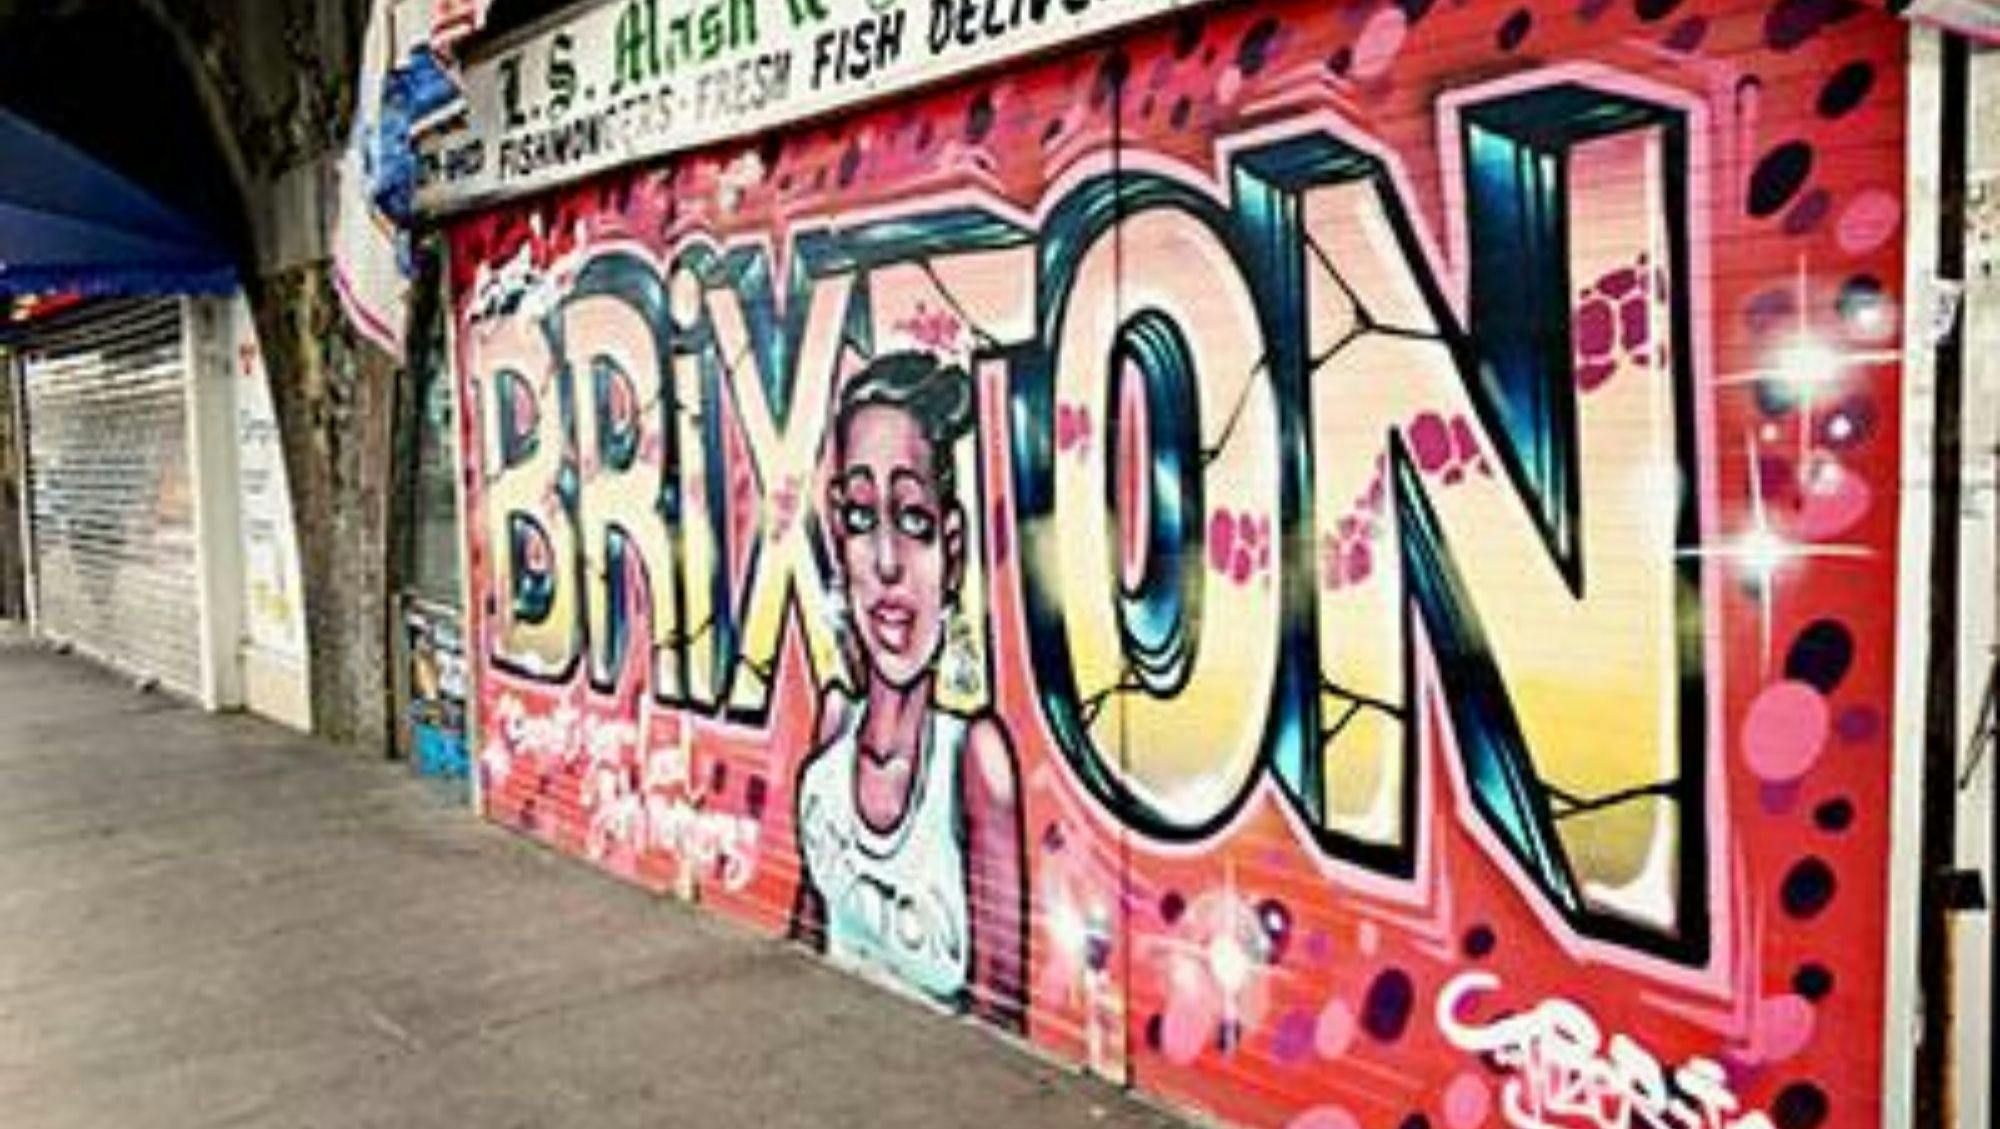 Brixton Private Tour mit einem lokalen Guide. 100 % personalisiert, See the City Unscripted